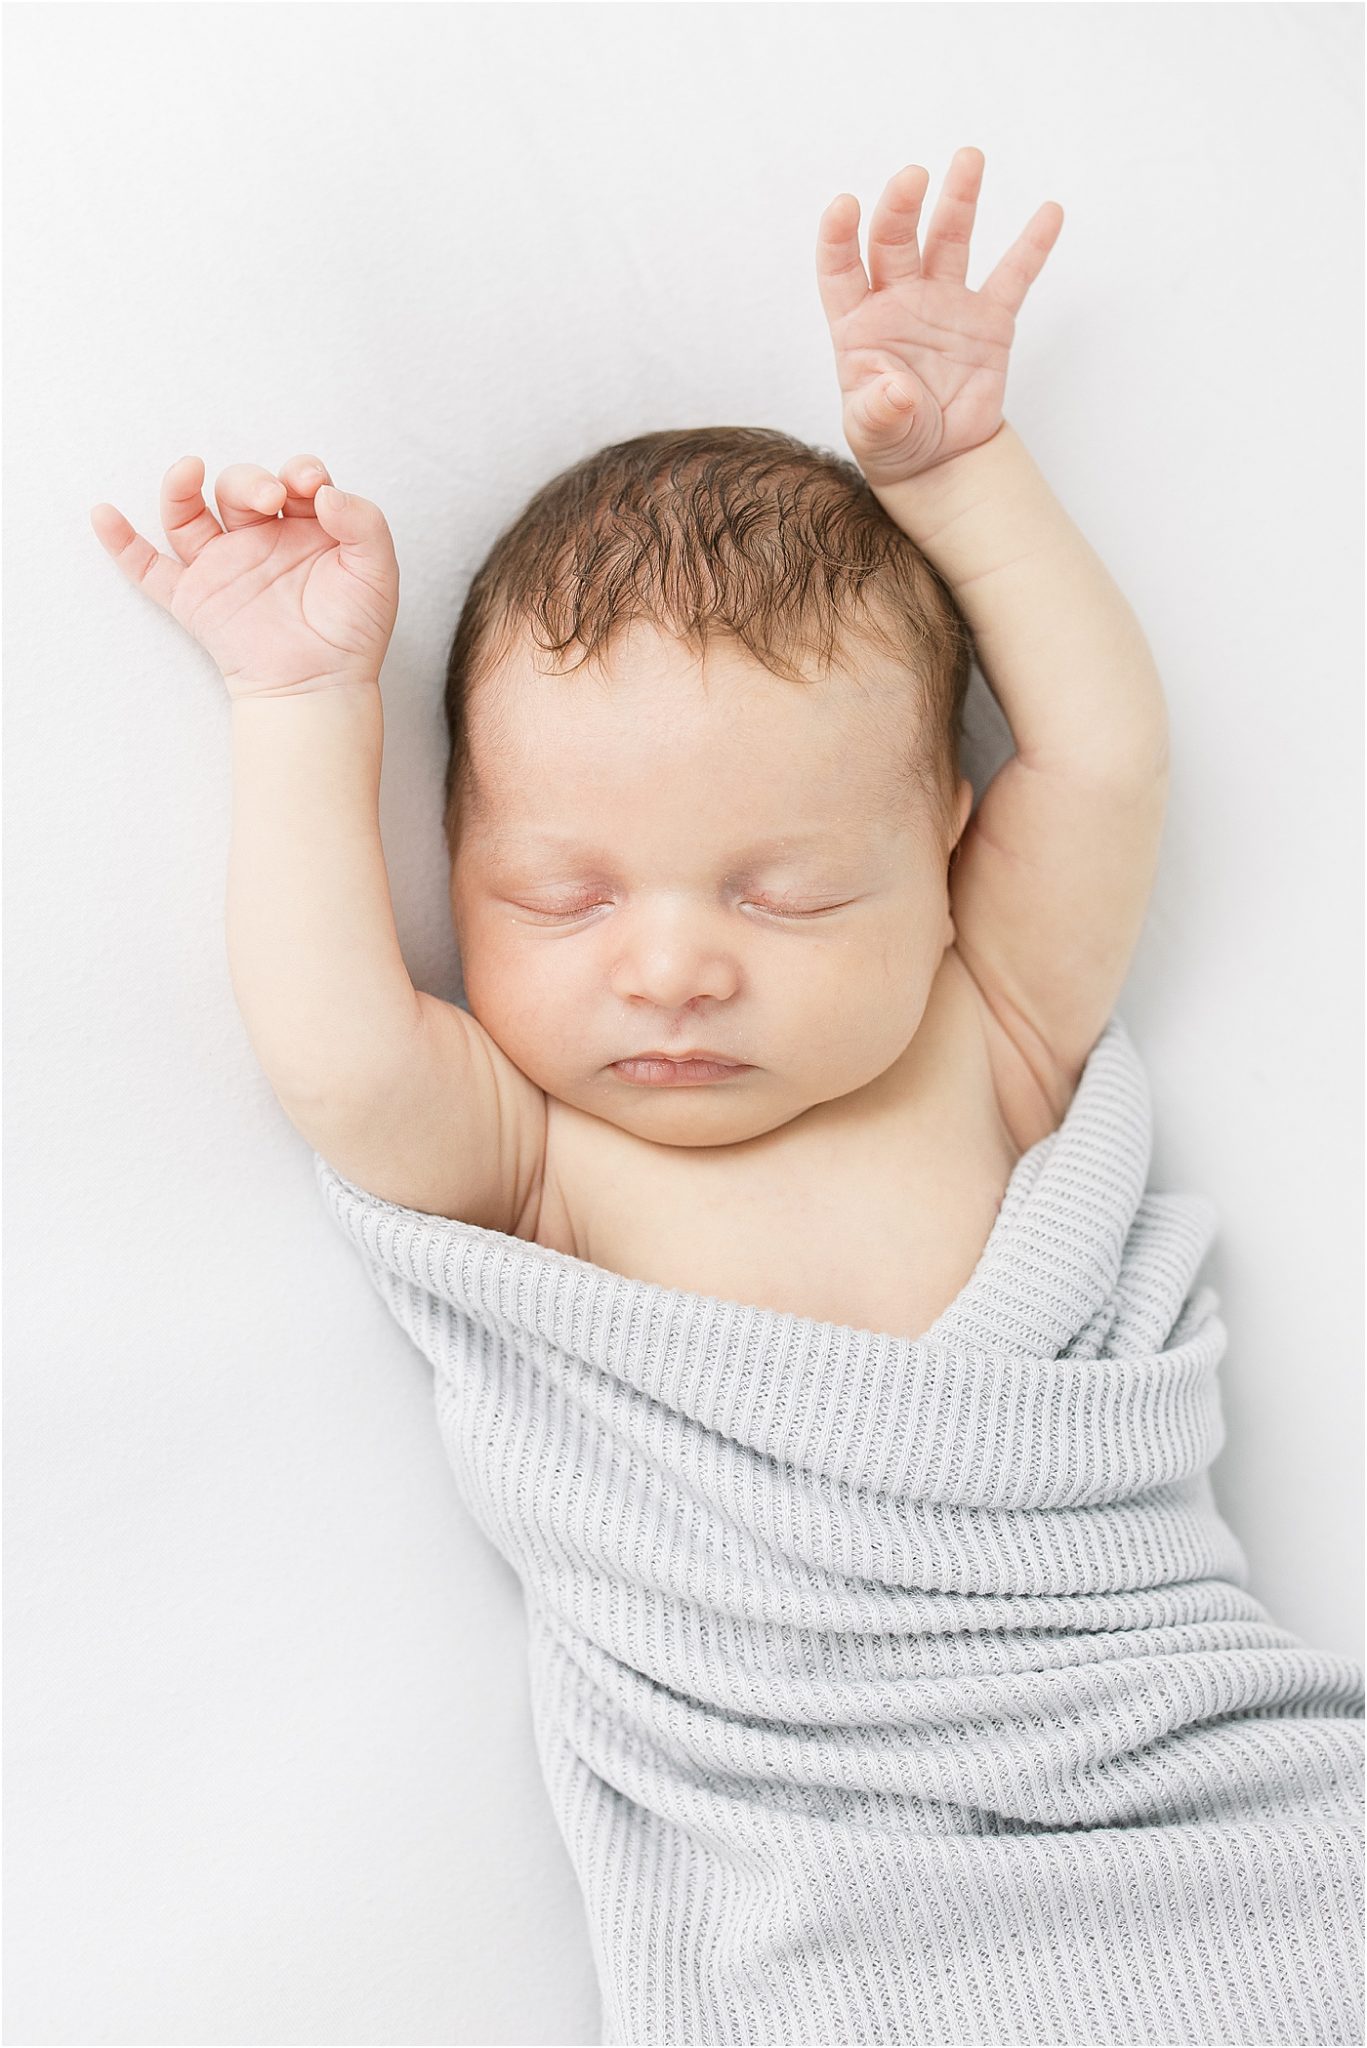 Newborn sleeping with arms up during photoshoot with Lindsay Konopa Photography.